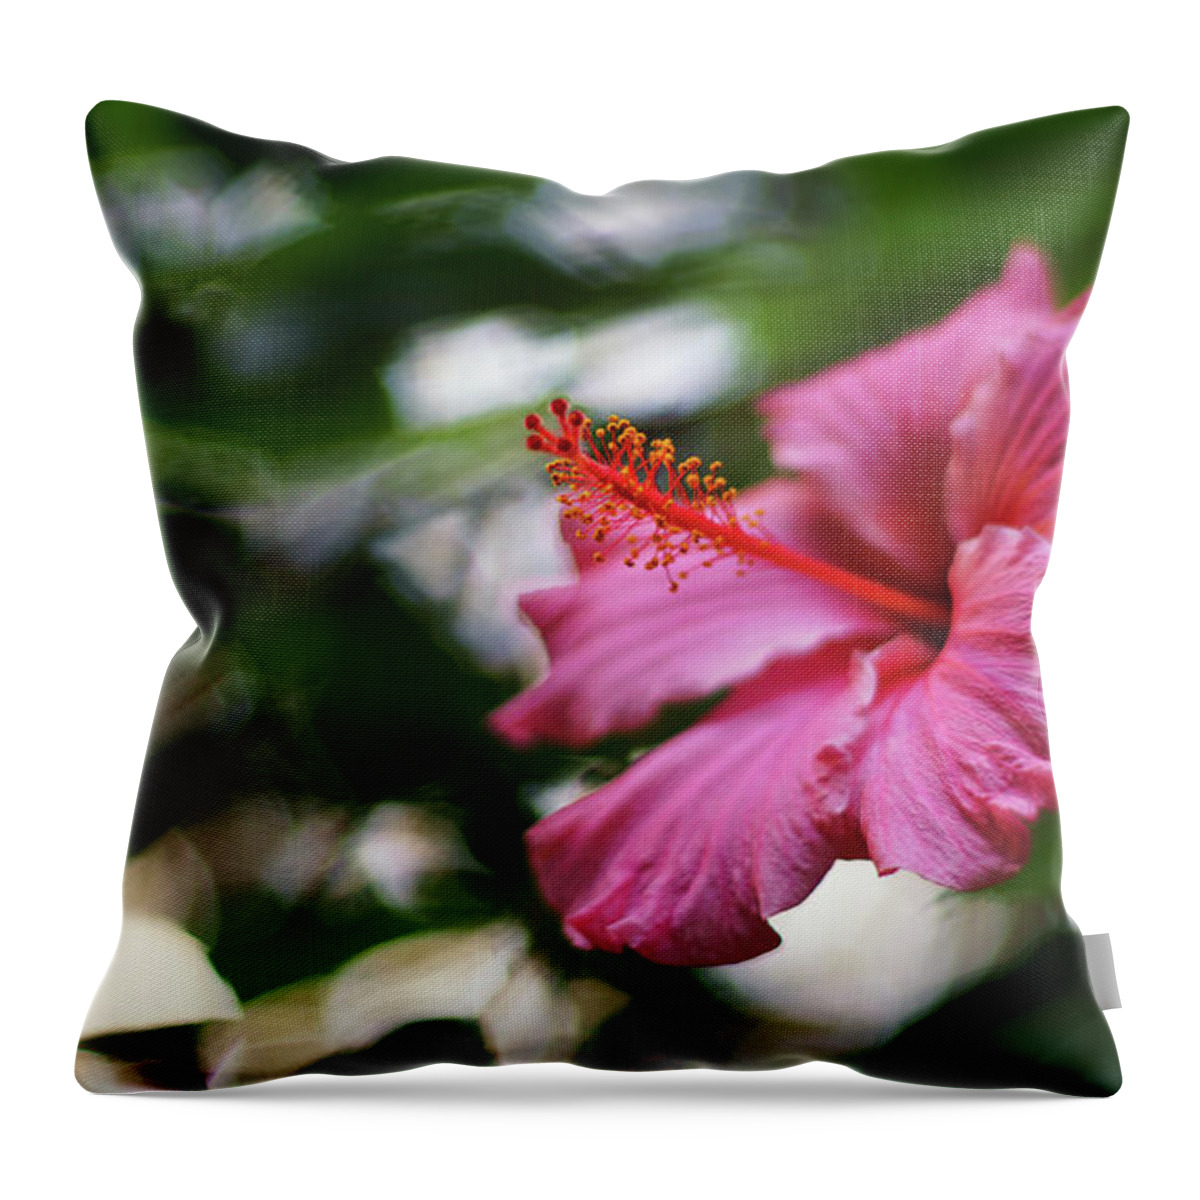 Beautiful Throw Pillow featuring the photograph Pink Hibiscus Flower by Pablo Avanzini